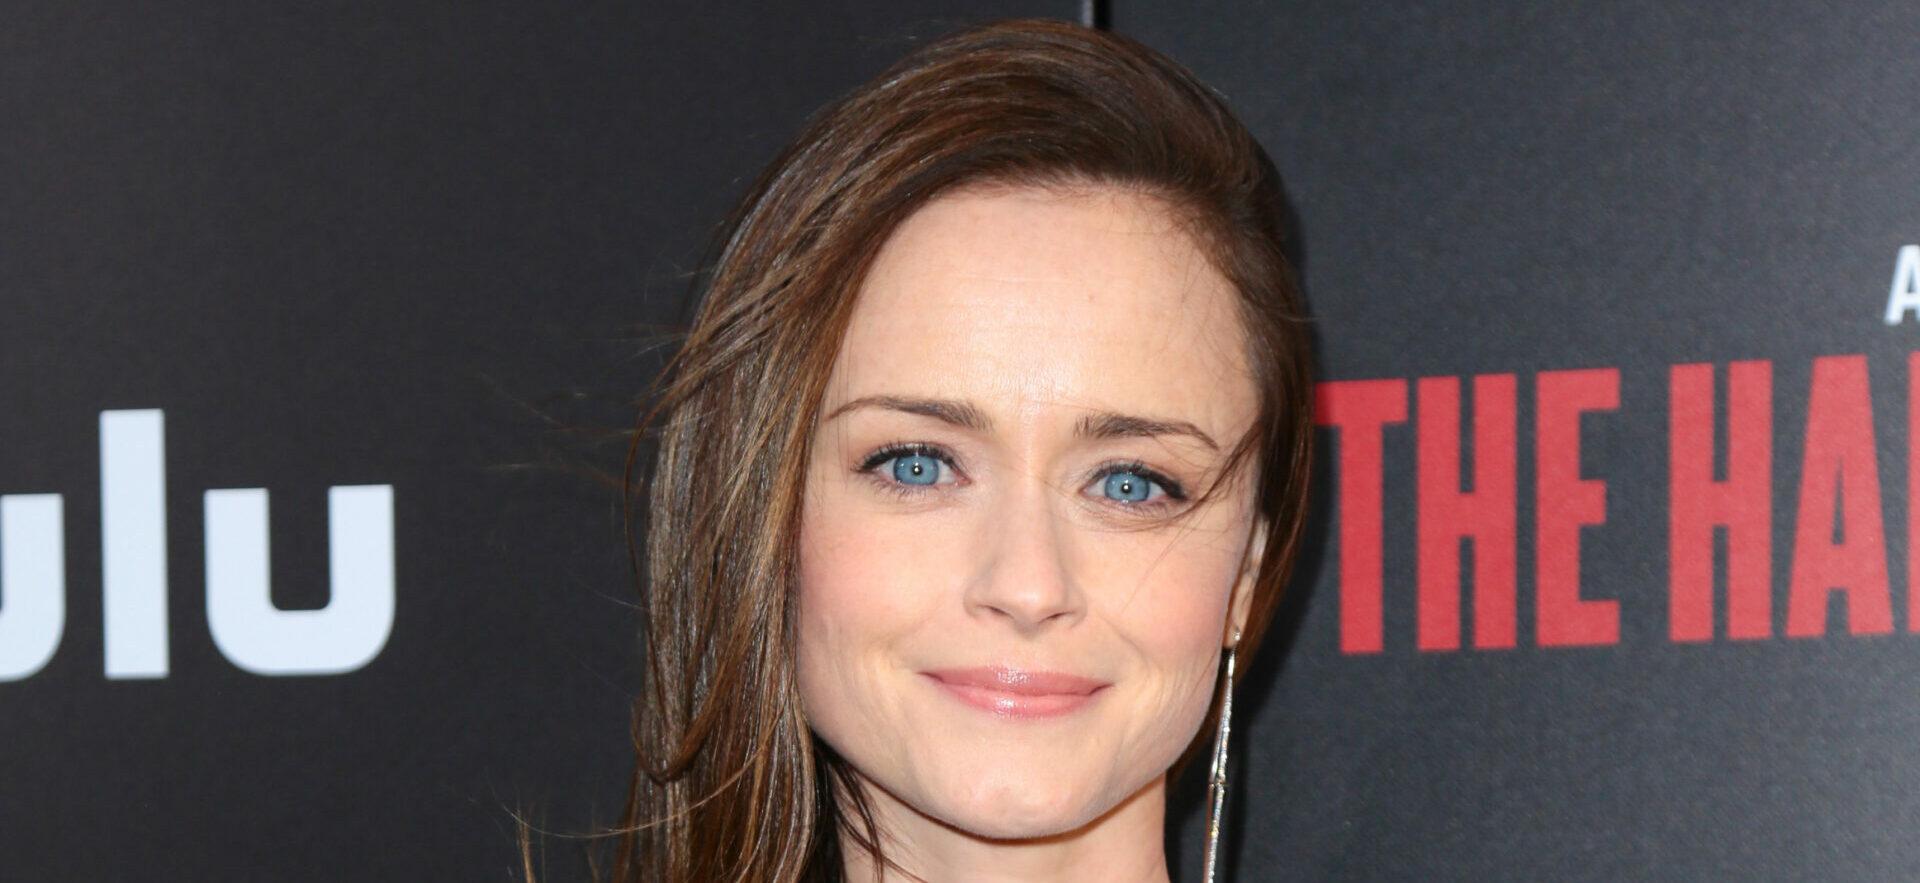 Did Alexis Bledel’s Personal Life Lead To ‘Handmaid’s Tale’ Exit?